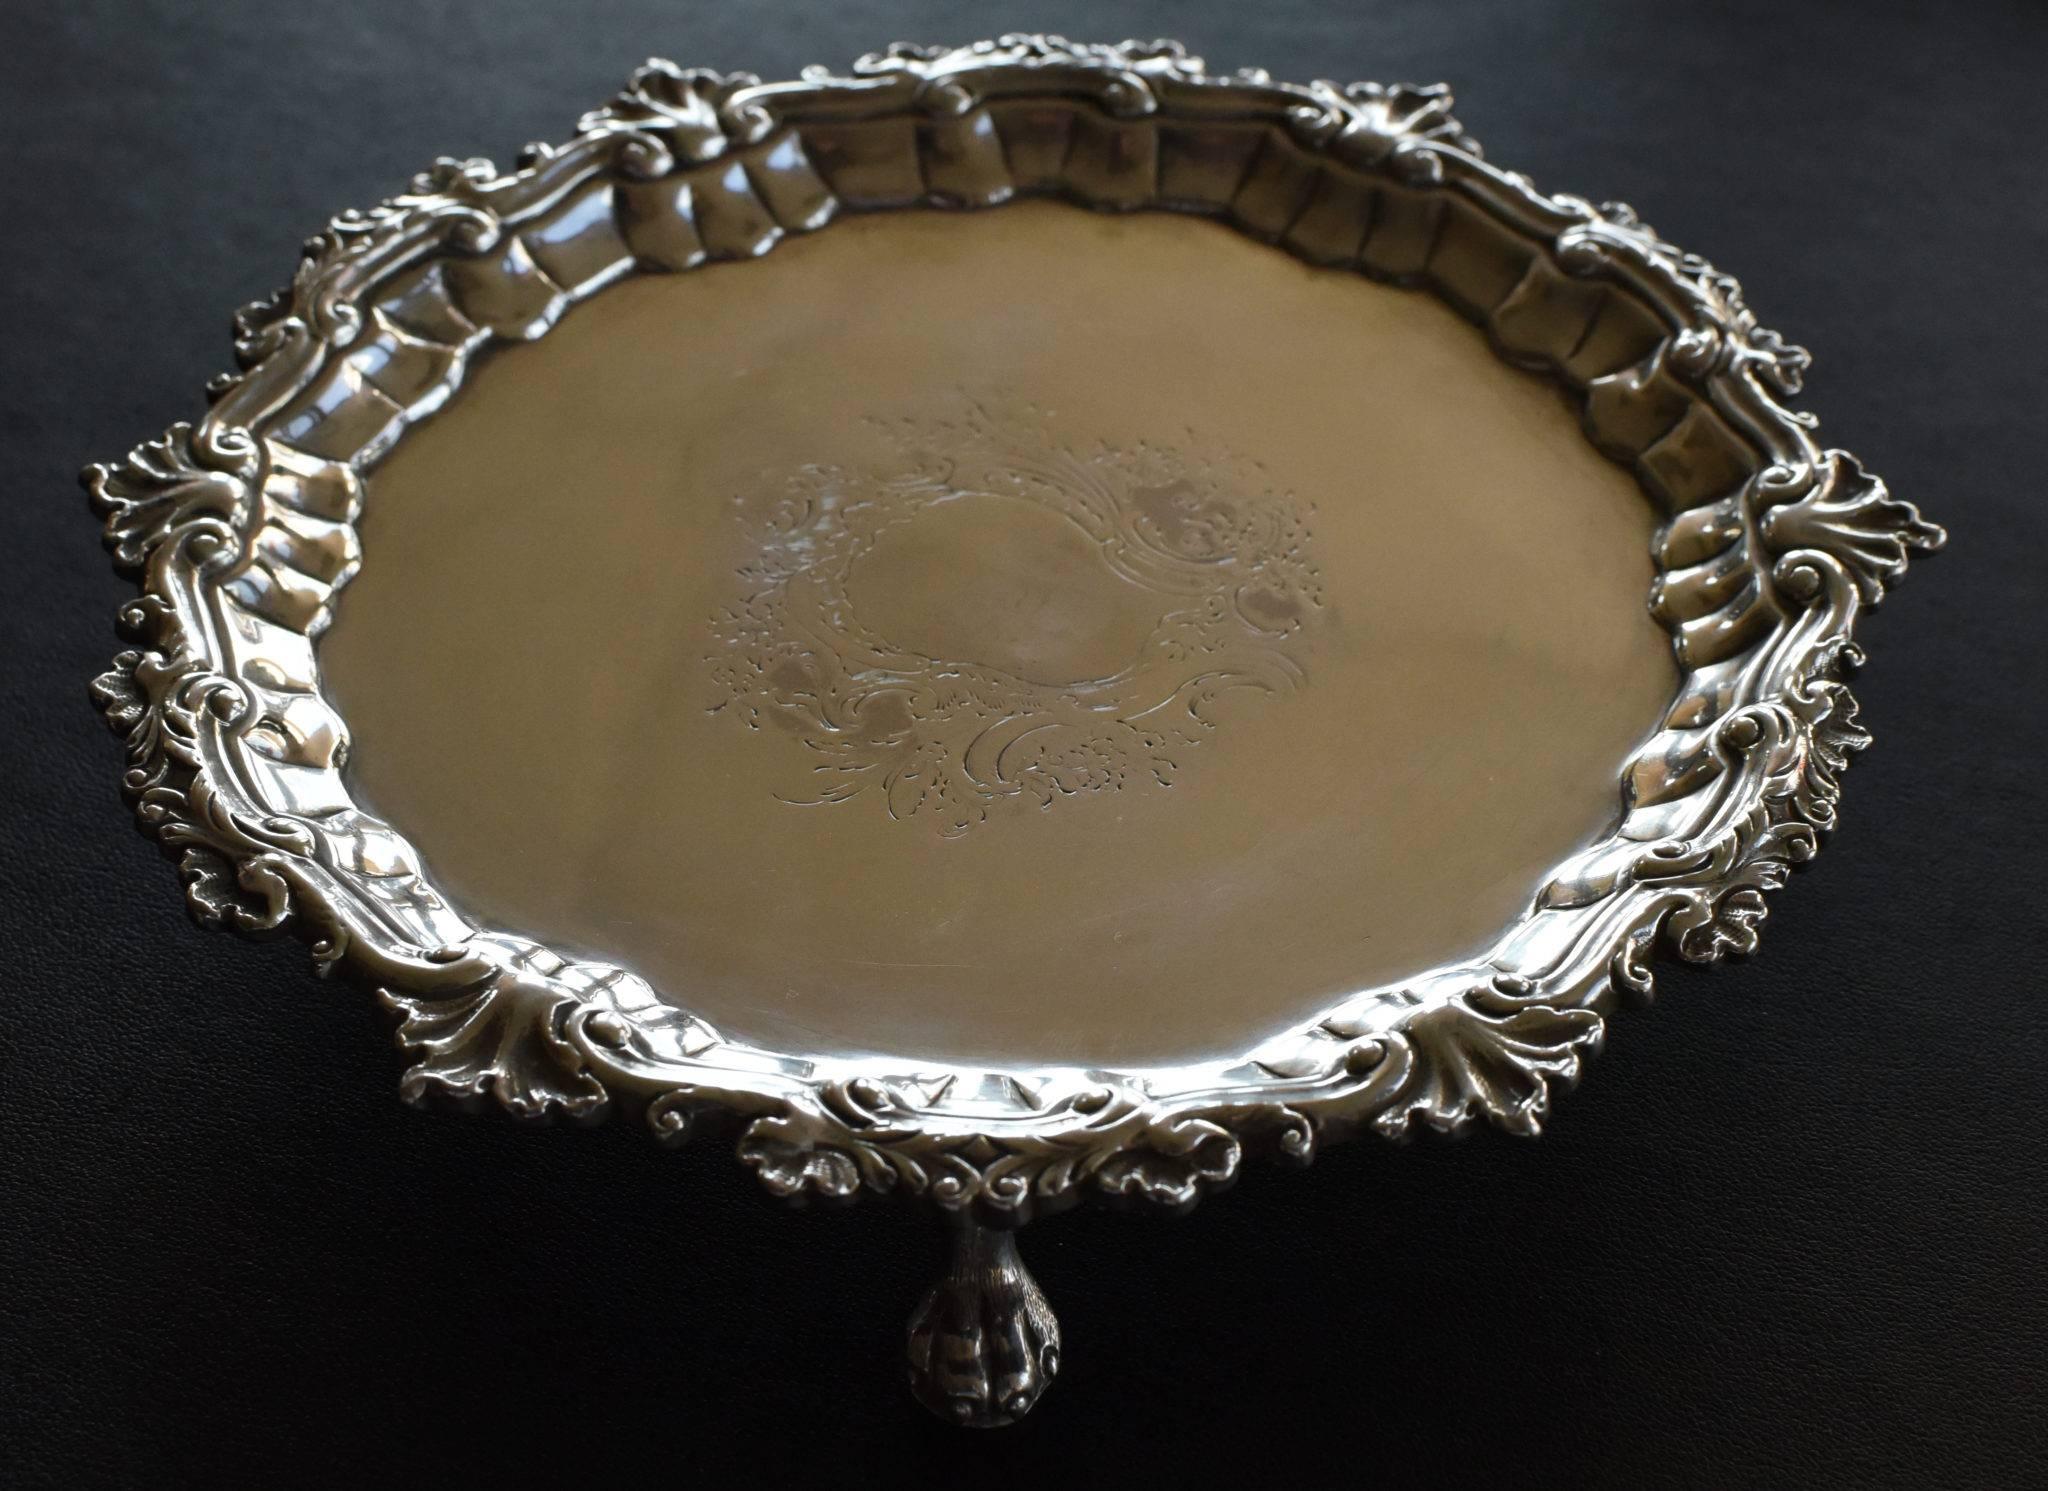 Fine Antique George III Sterling Silver Salver with an armorial engraving in the middle top of the Salver  Measures 7 1/8 inches and 10.5 Troy Ounces  Dated 1747